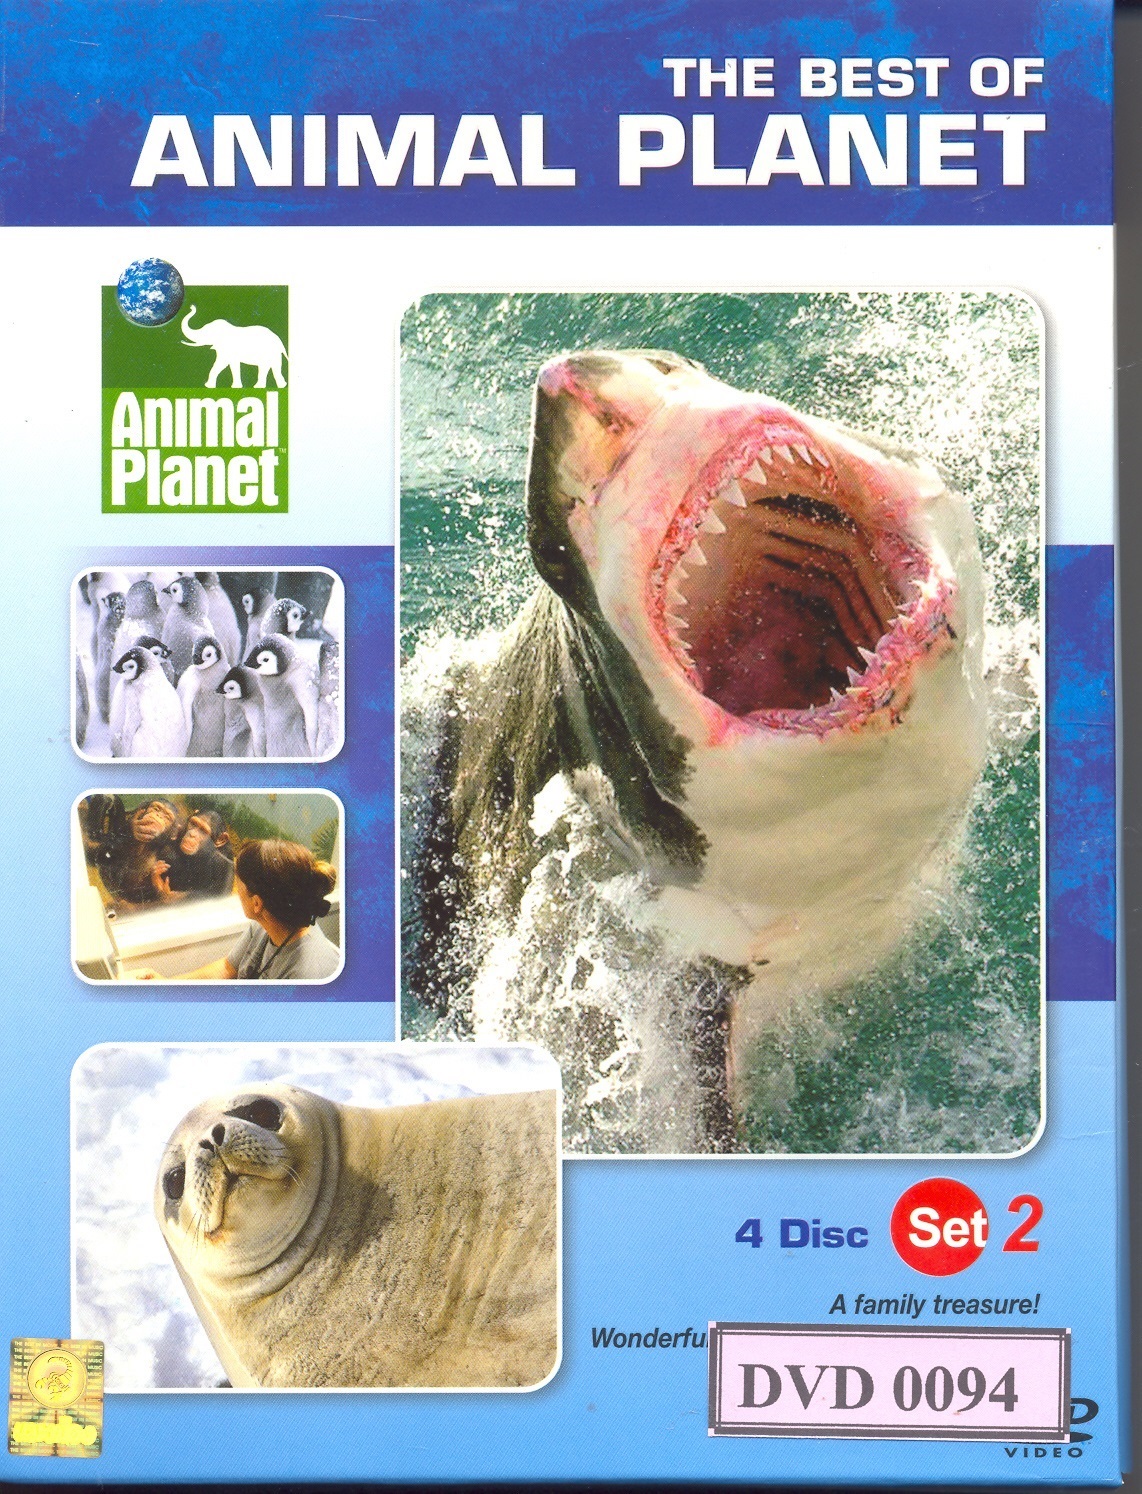 The Best of Animal Planet (4 Disc set 2) 